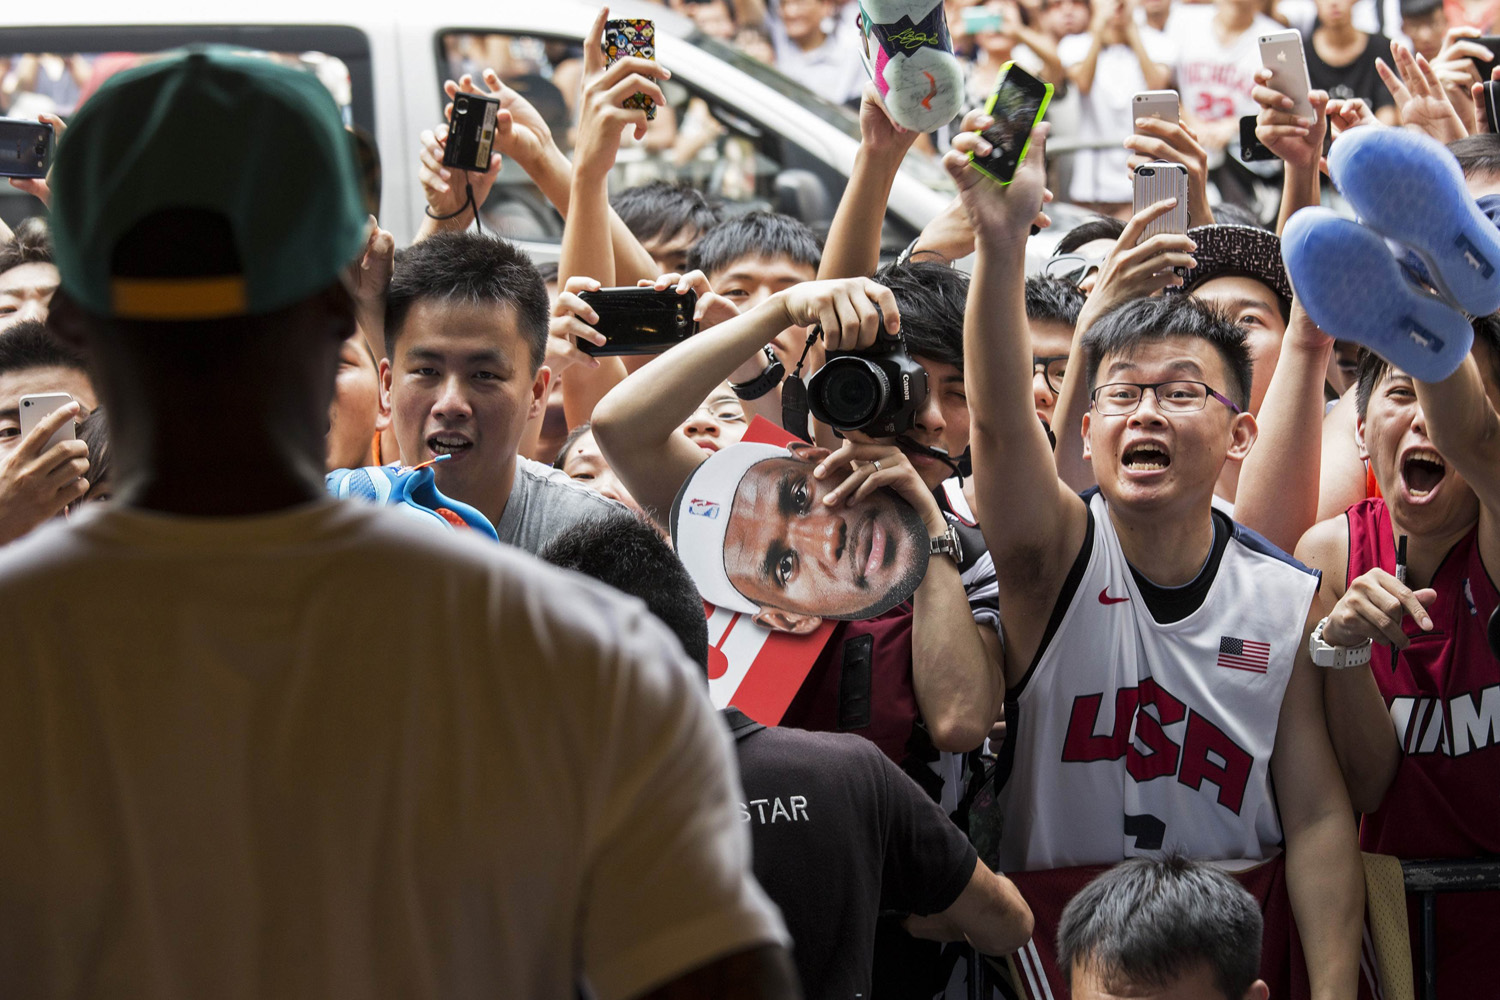 Fans wave and yell at NBA basketball player LeBron James (L) of the Cleveland Cavaliers during a promotional event in Hong Kong on July 23, 2014.